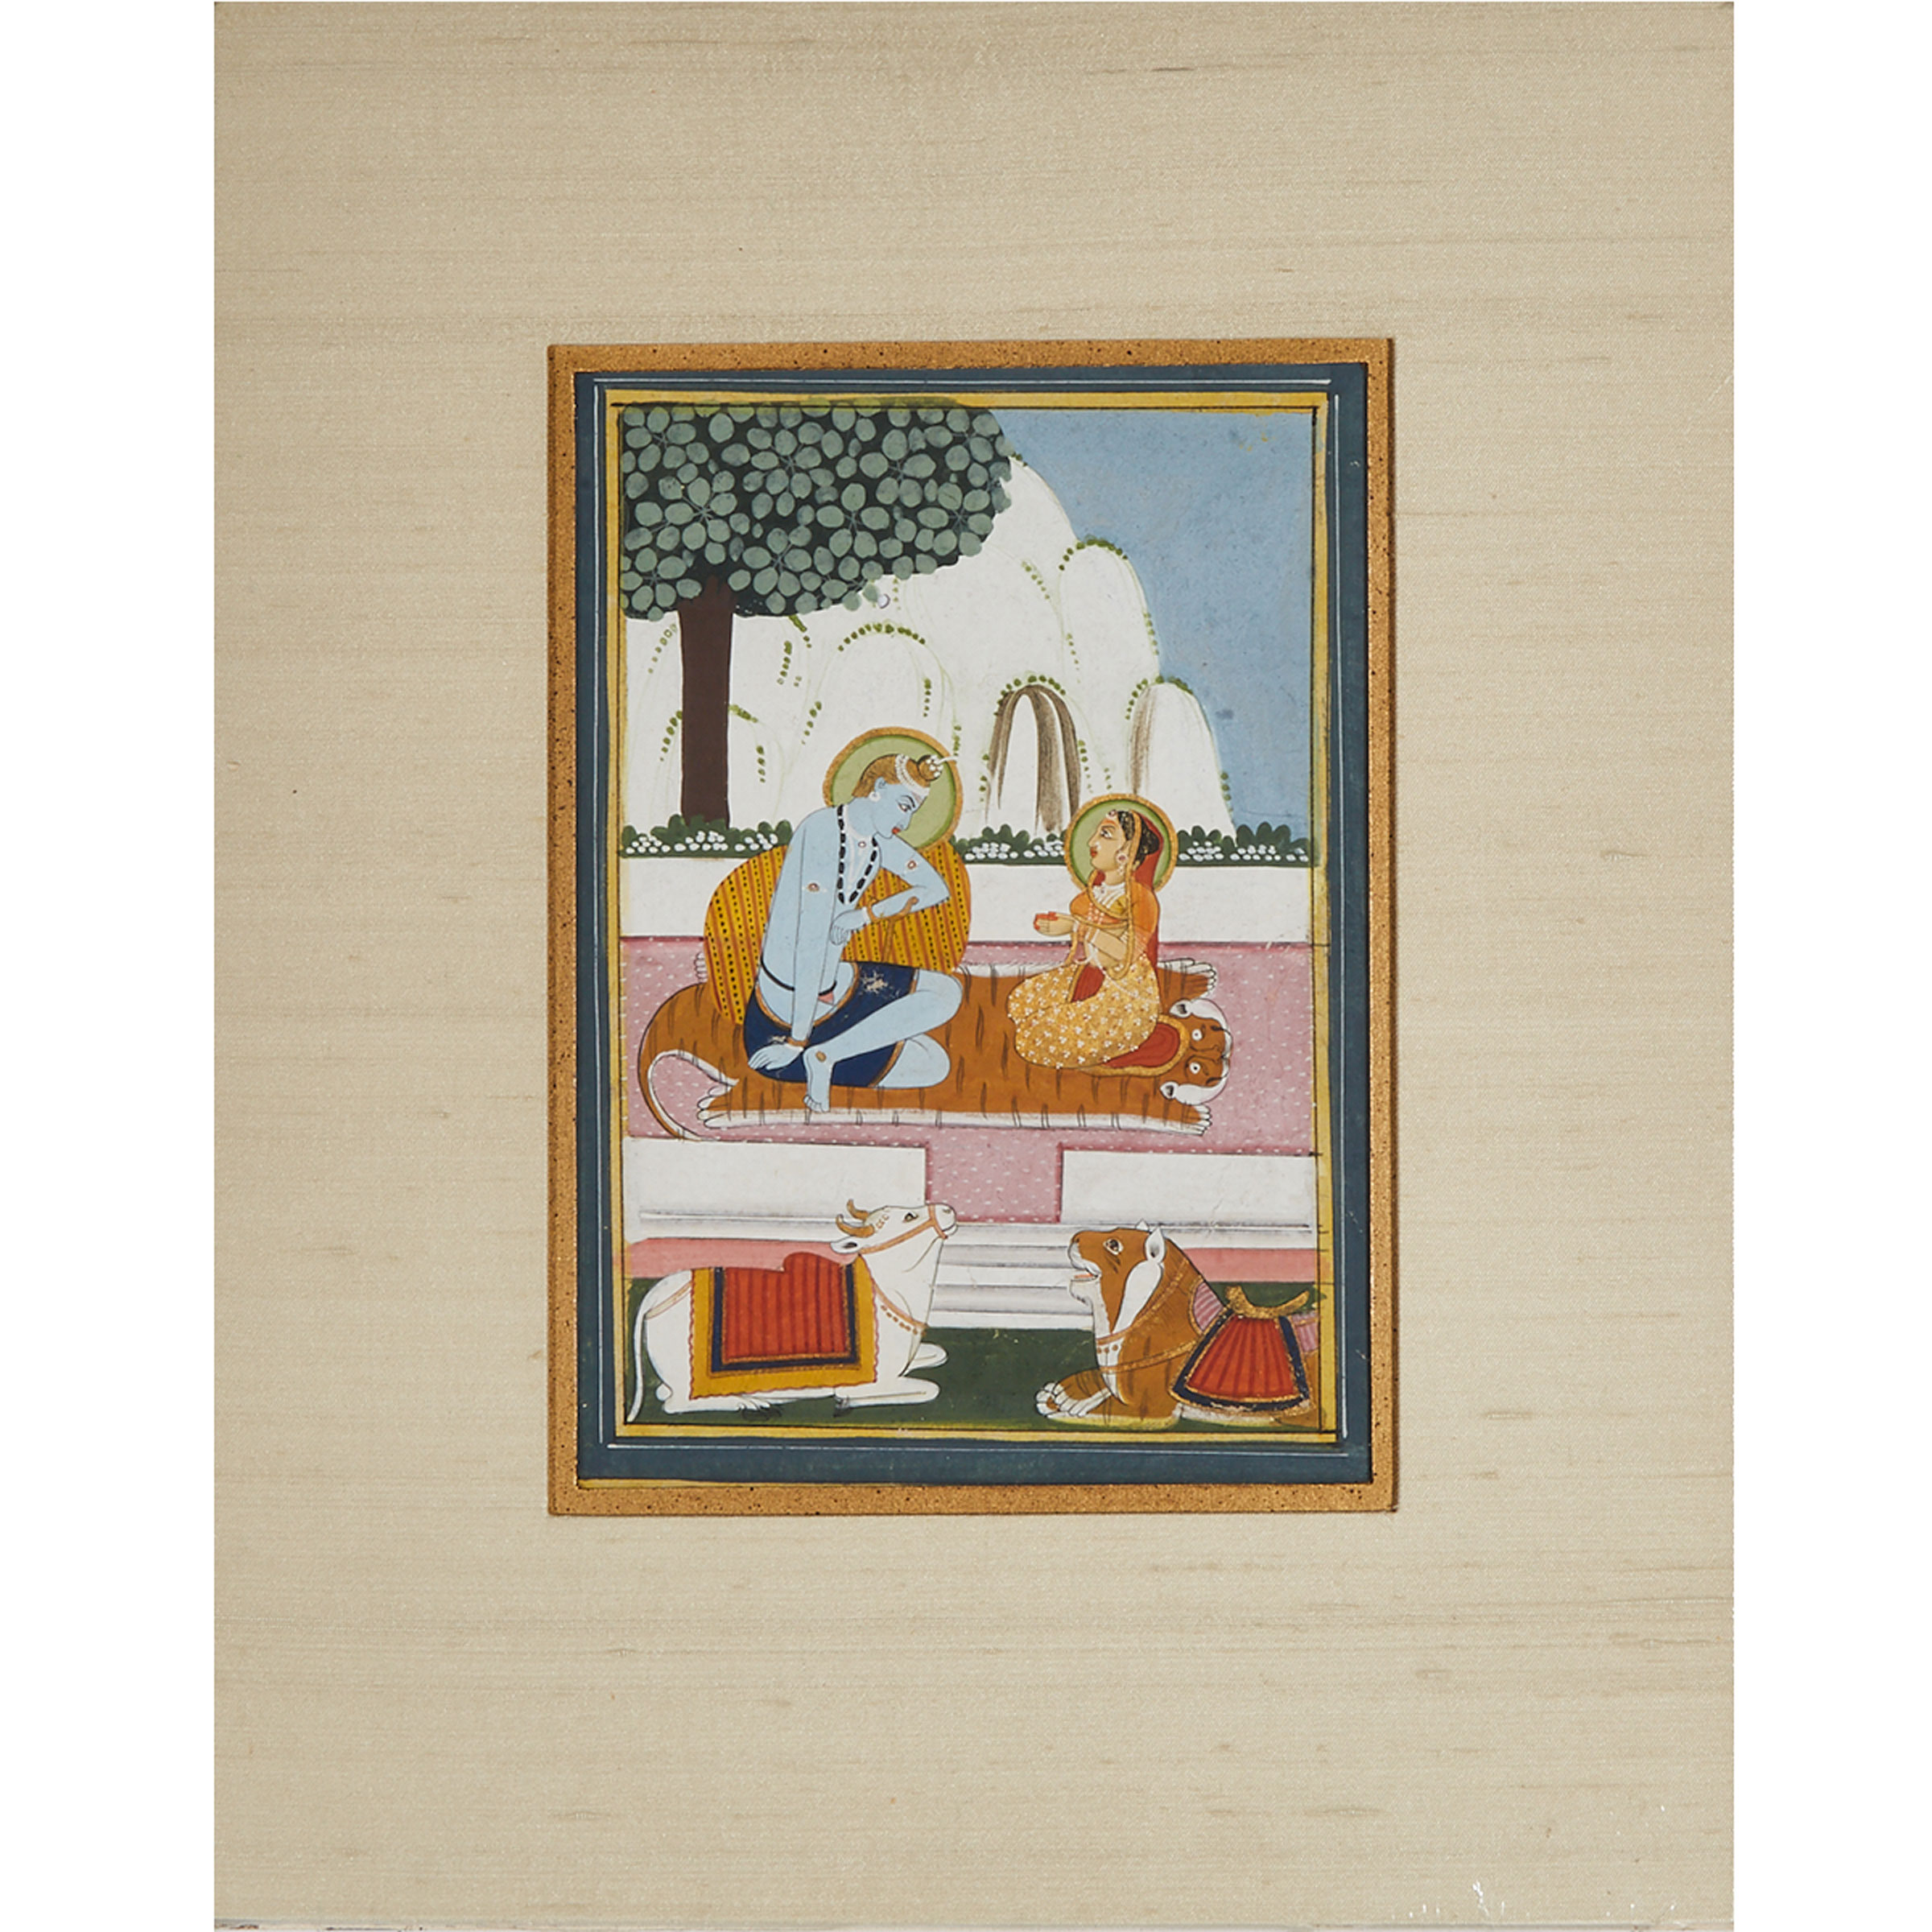 A Miniature Painting of Shiva and Parvati, North India, Circa 1800